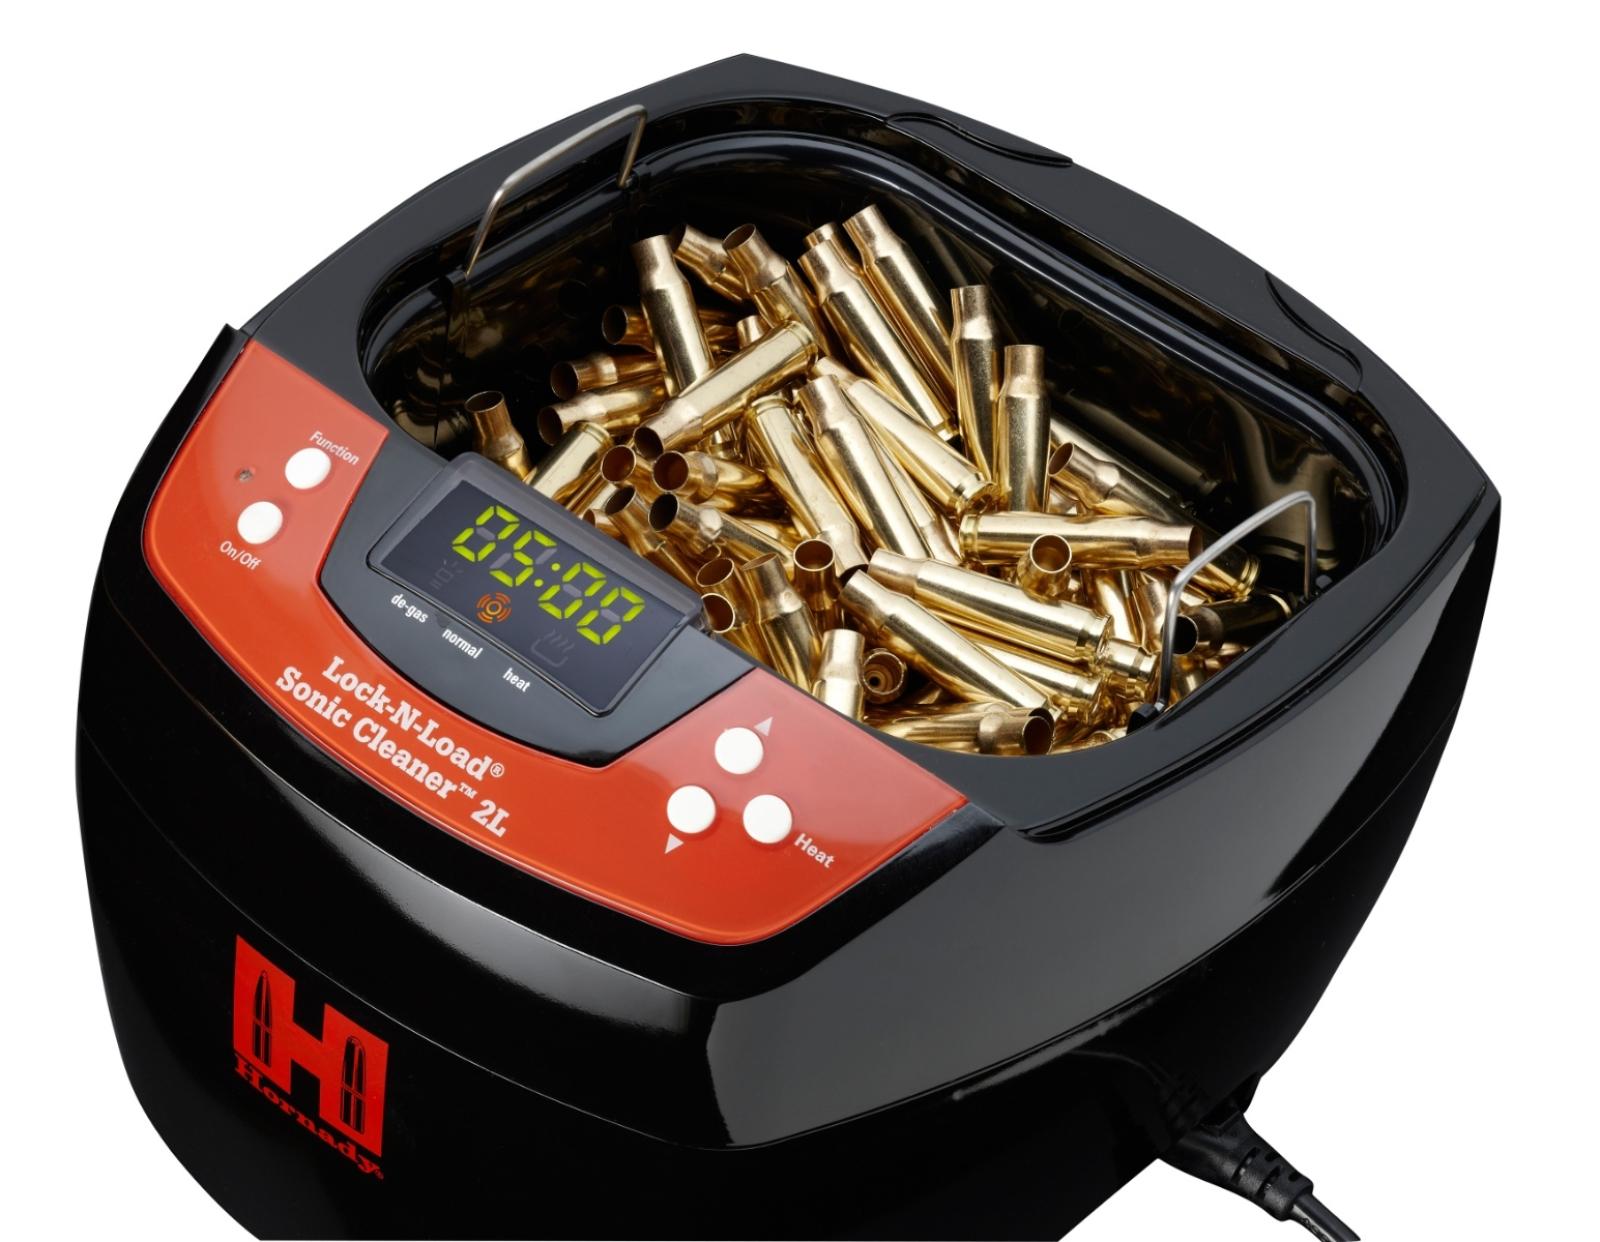 Hornady Lock-N-Load Sonic Cleaner 2L